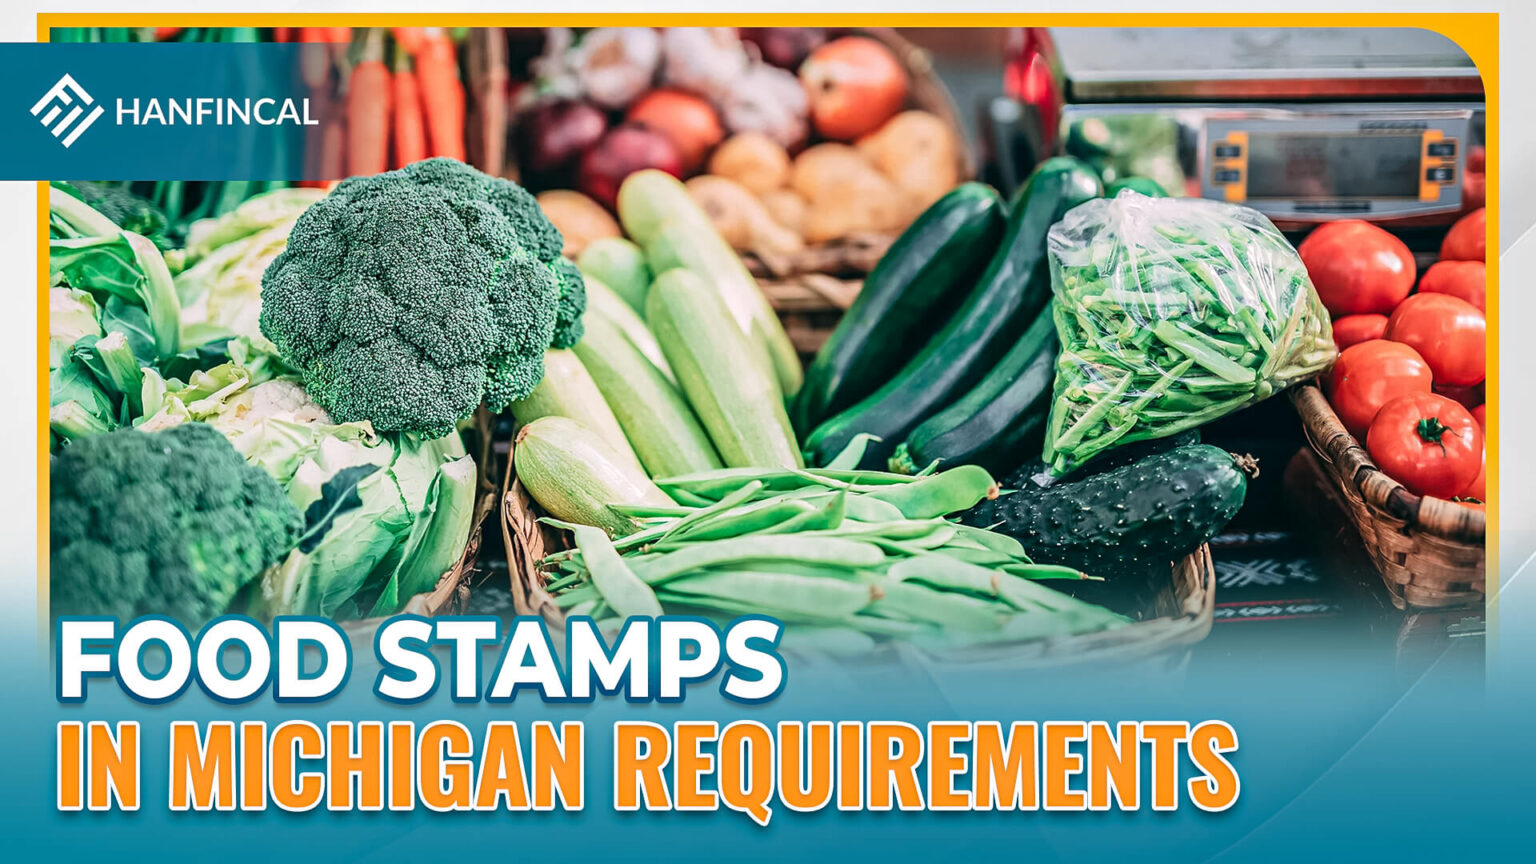 How to apply for Food Stamps in Michigan (02/2023)? Hanfincal